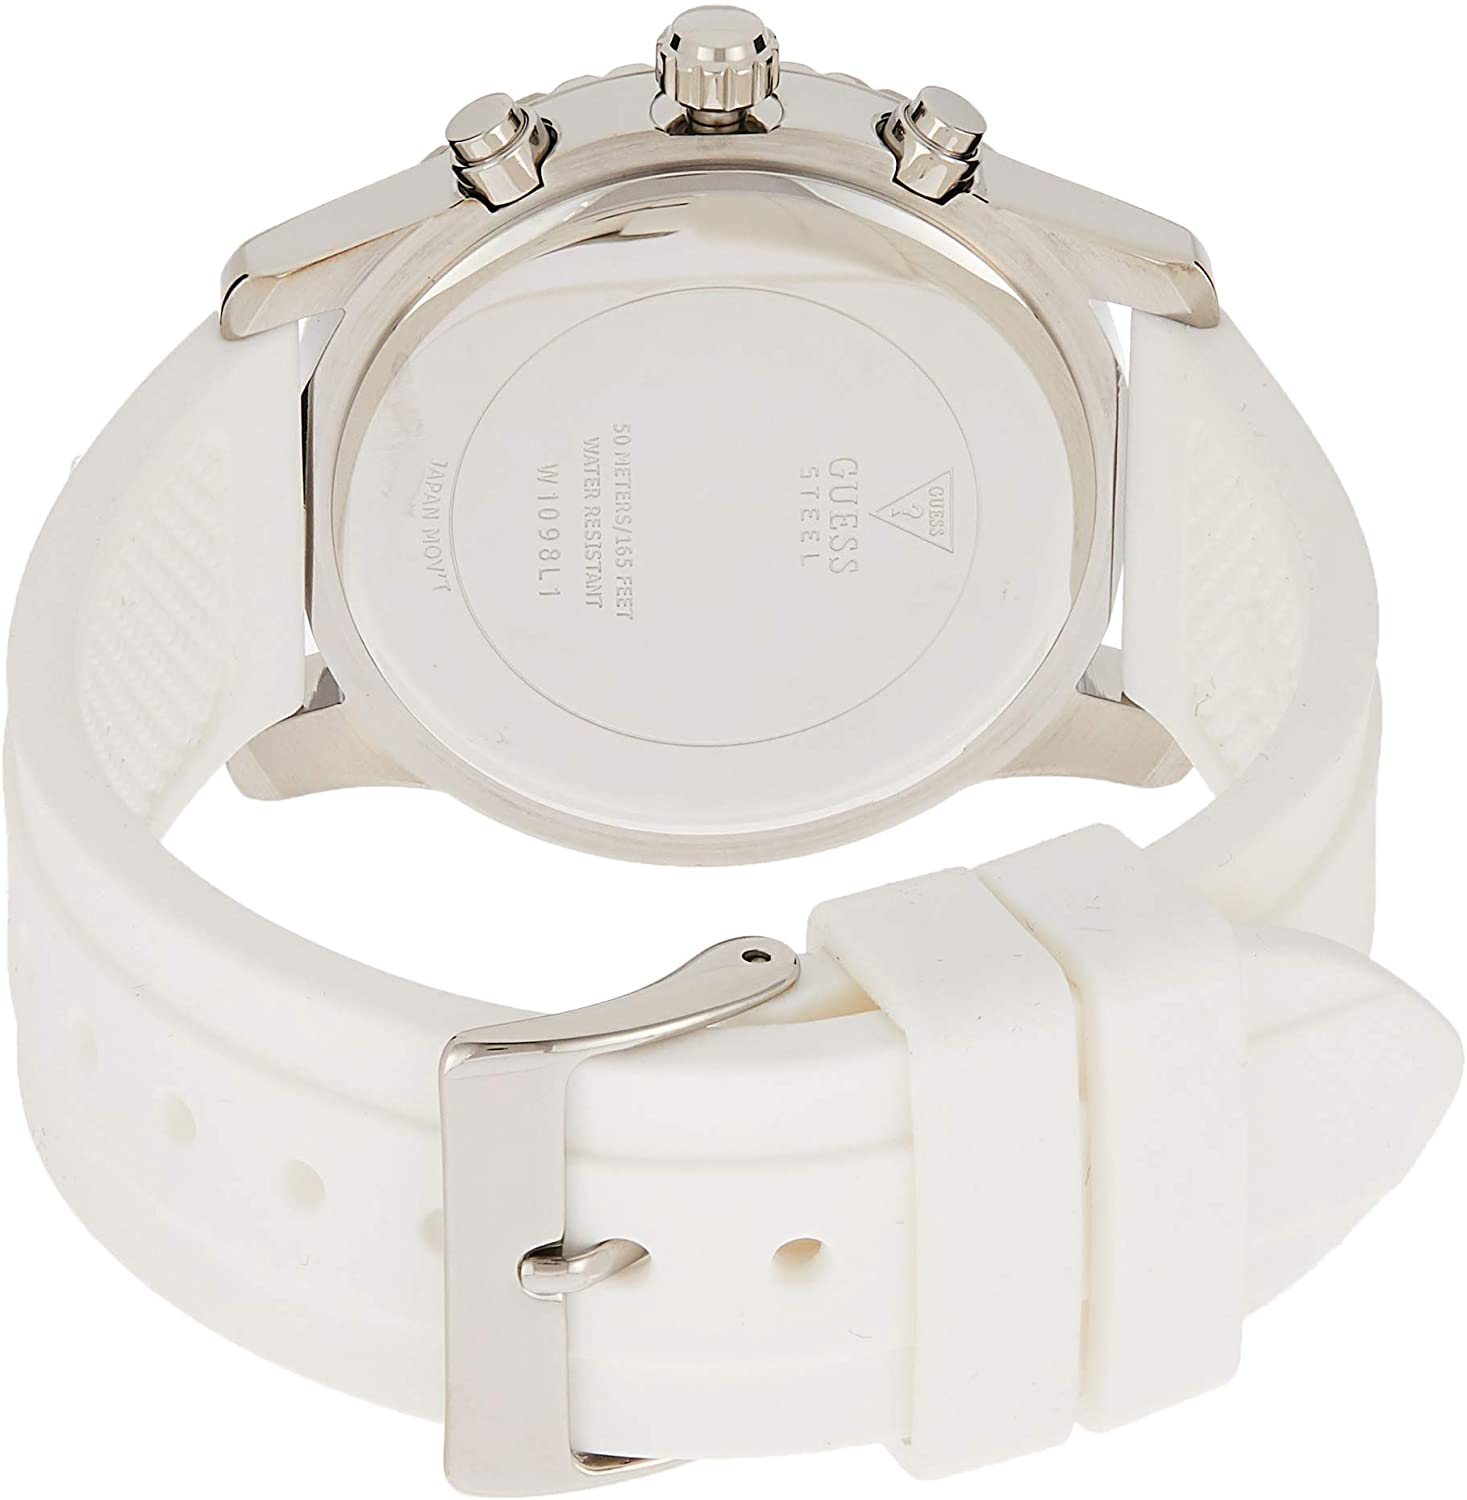 ĐỒNG HỒ NỮ DÂY SILICONE GUESS CONFETTI W1098L1 WOMEN´S WATCH 38 MM RUBBER STRAP WHITE BATTERY 5